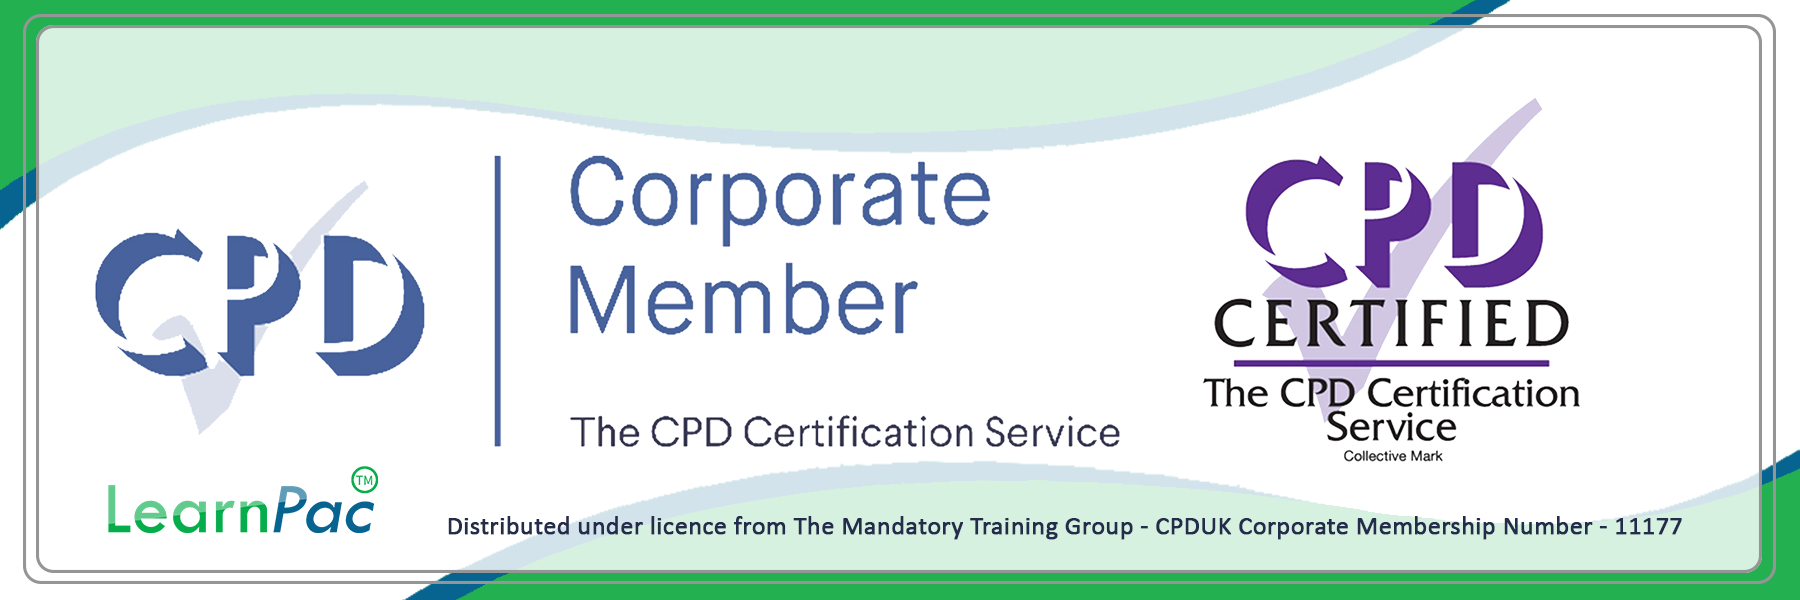 Manage Conflict Within A Team - Online Training Course - CPDUK Certified - Learnpac System UK - 